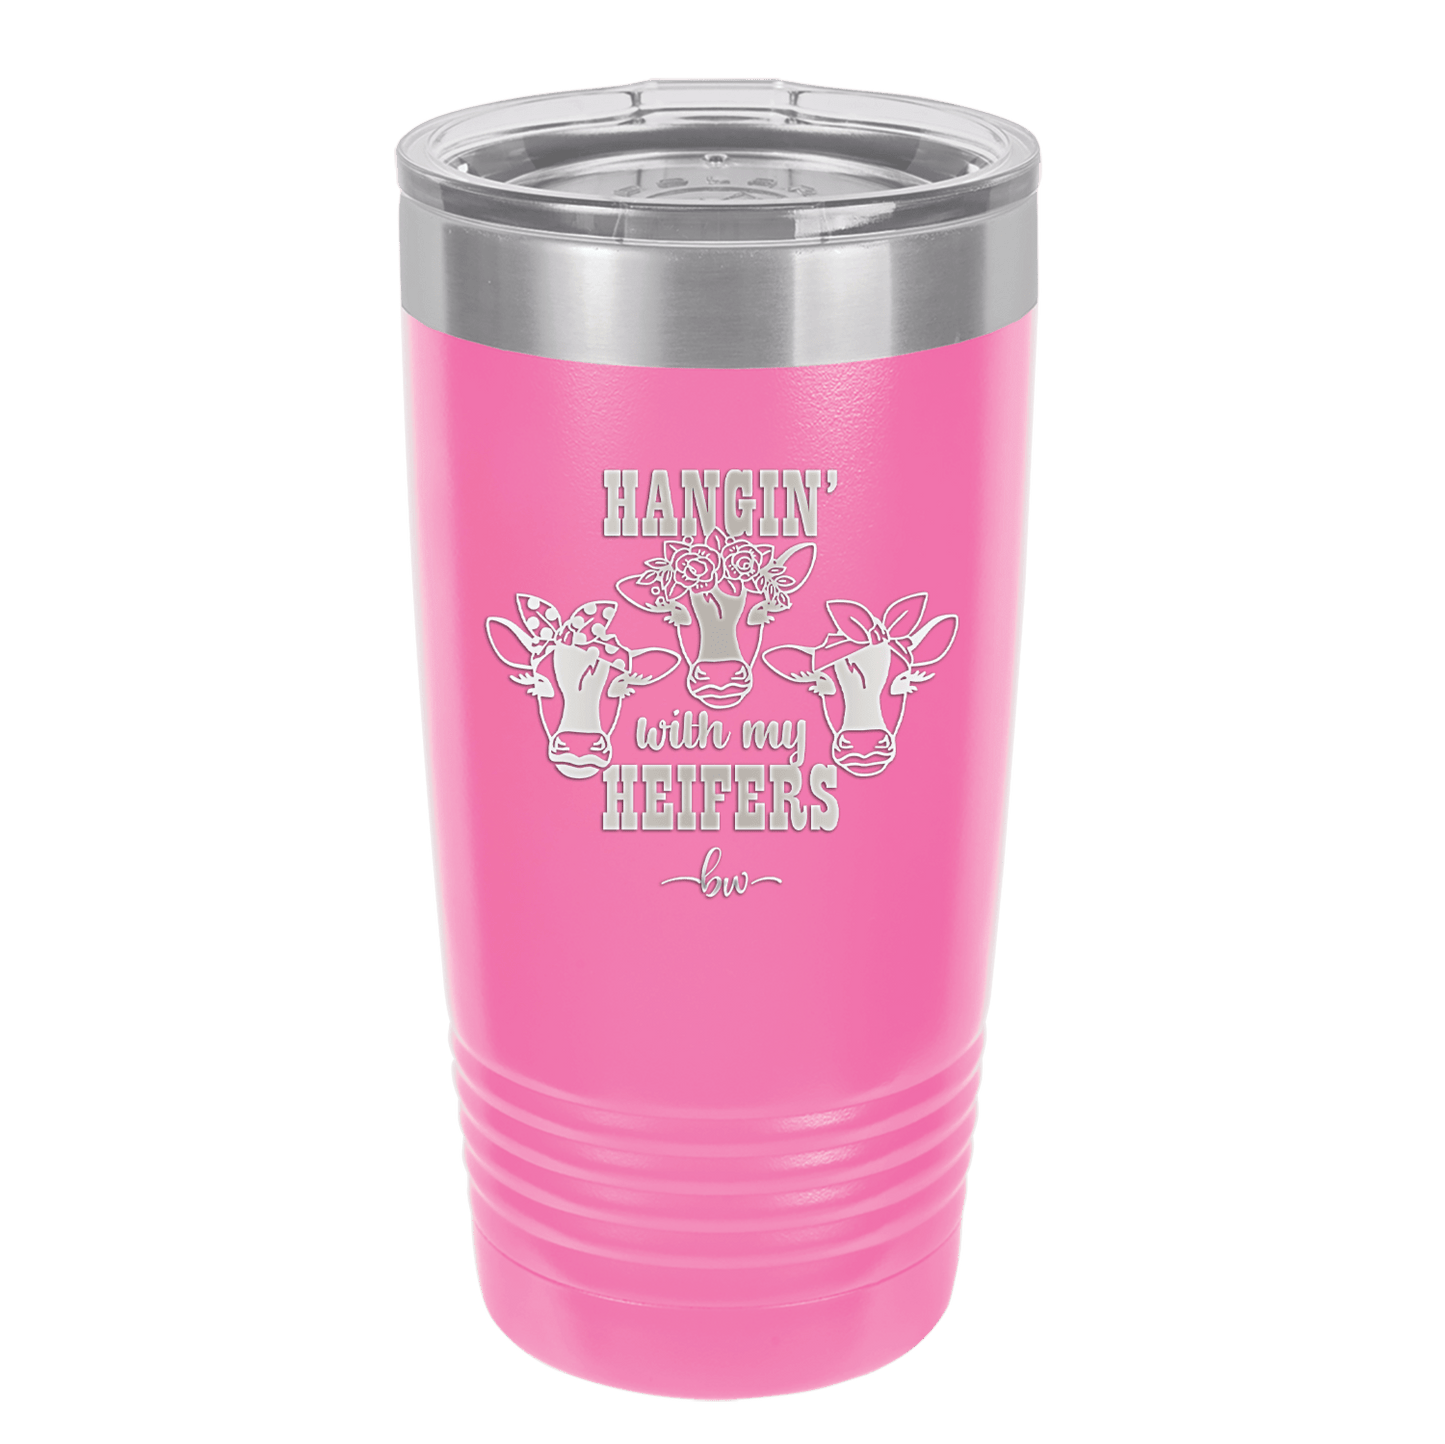 Hangin' with My Heifers 2 - Laser Engraved Stainless Steel Drinkware - 1492 -